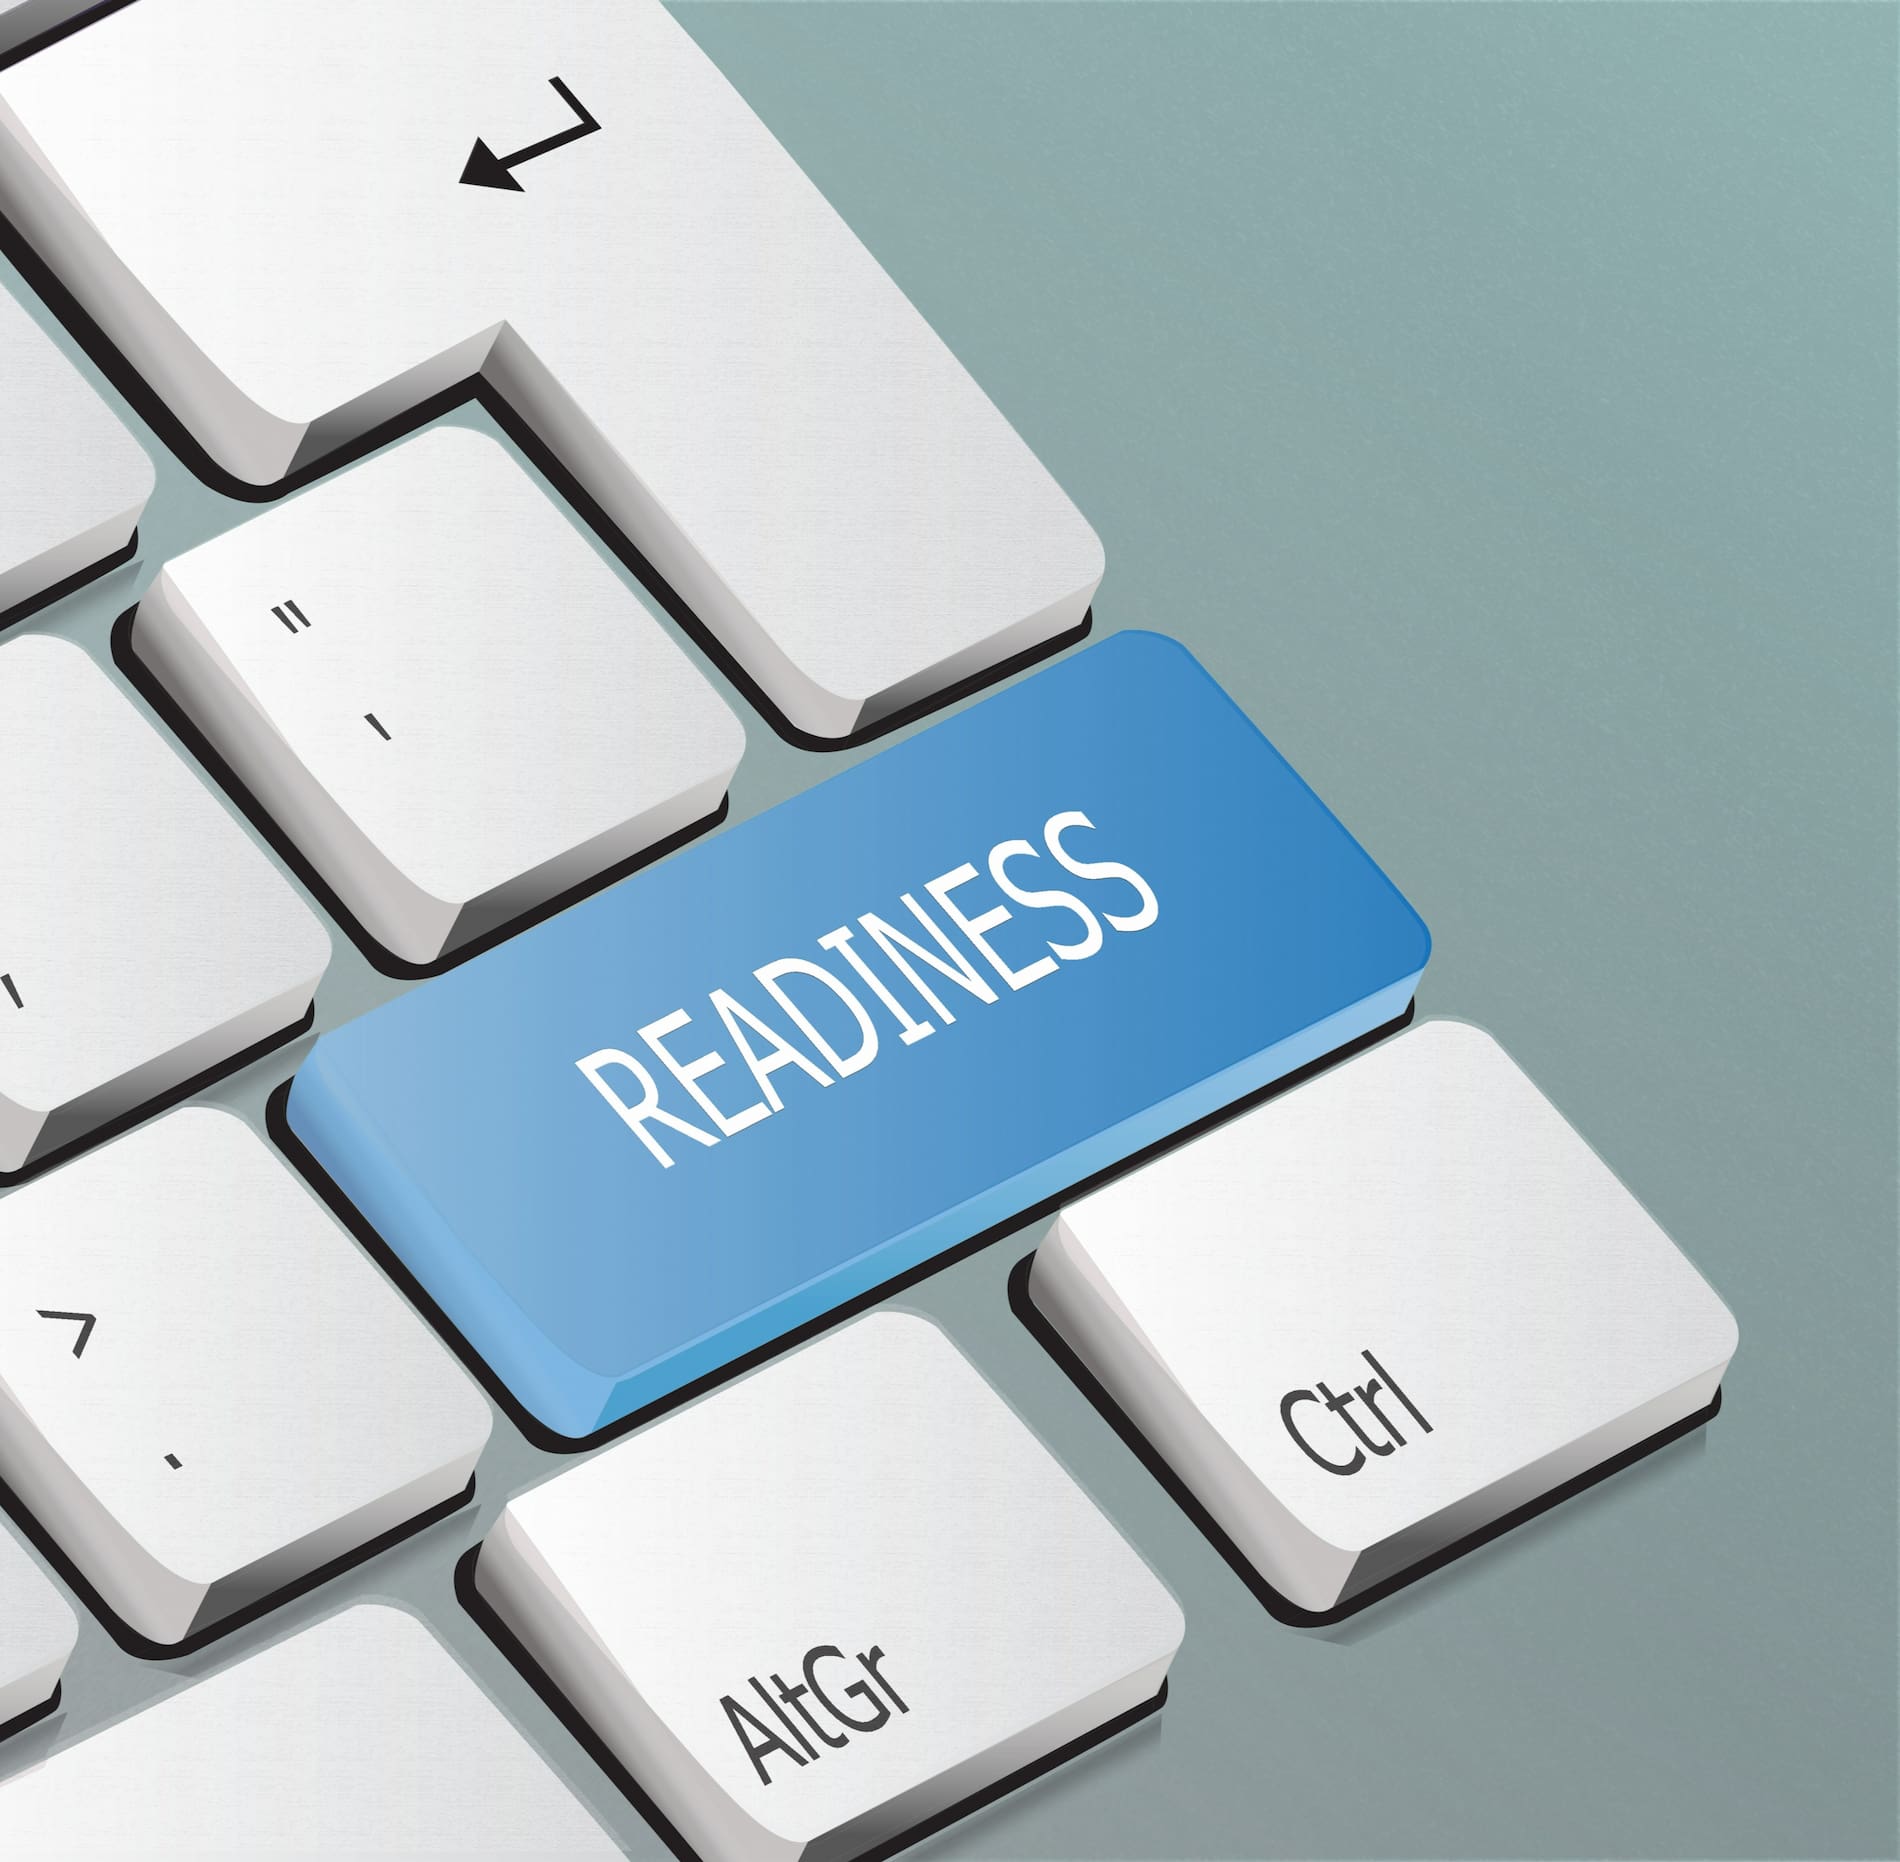 the word 'readiness' on a keyboard